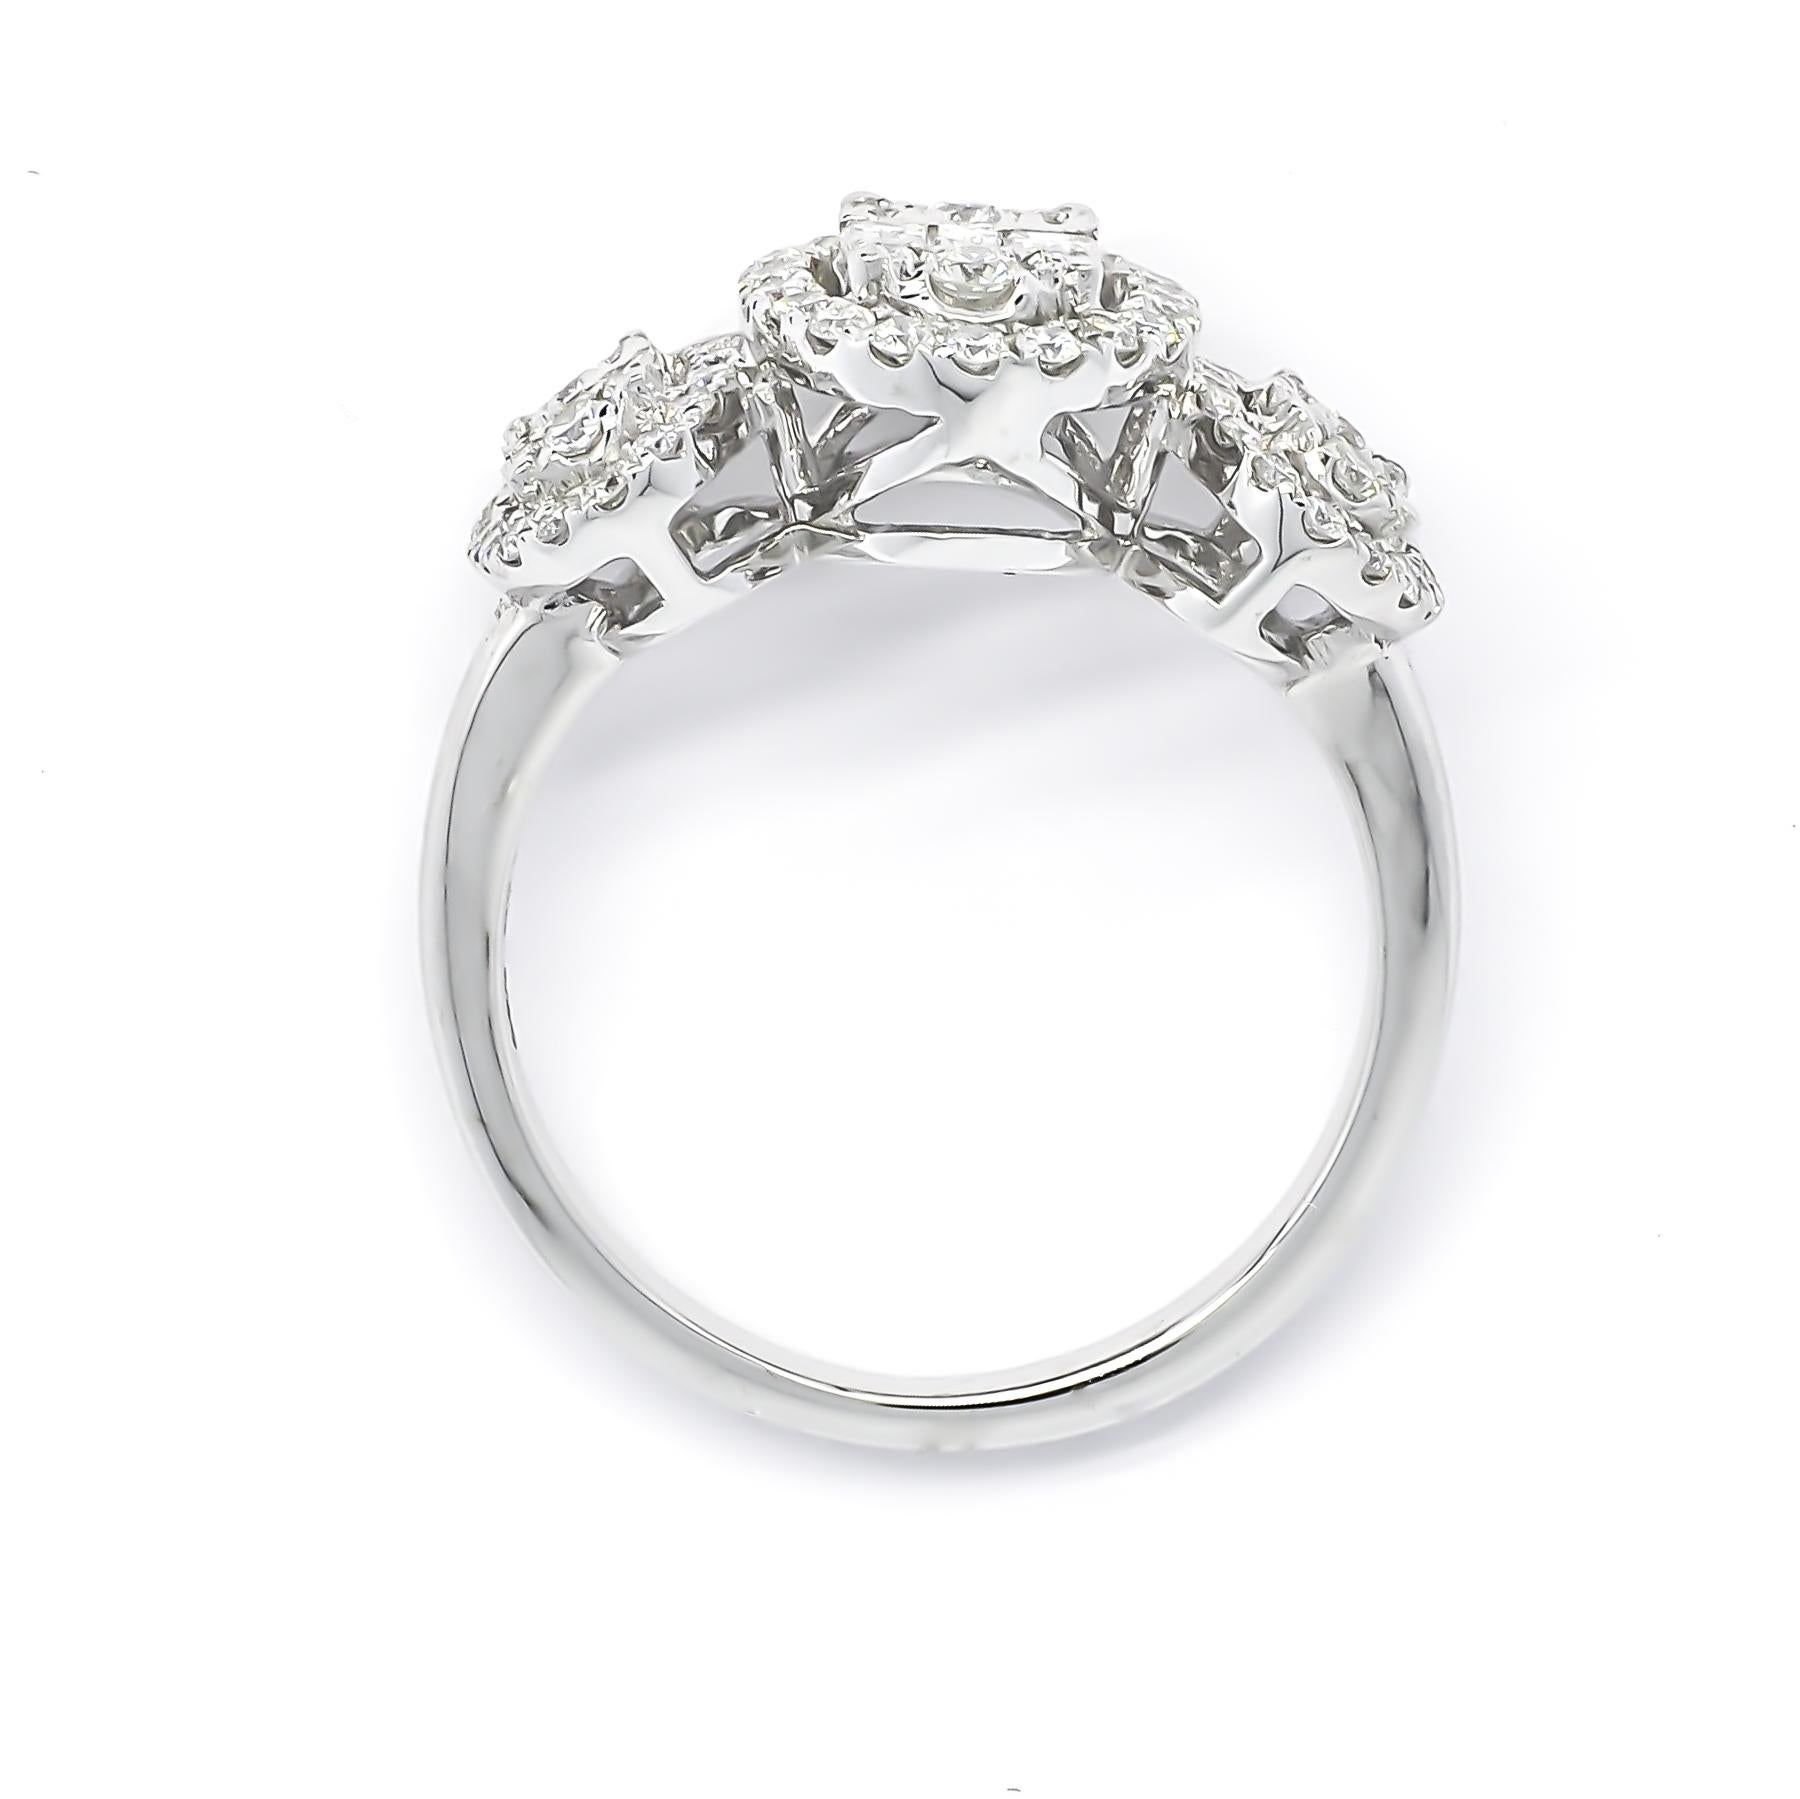 For Sale:  18KT White Gold 3 Cluster Diamond Engagement Ring R61146, Statement Diamond Ring 4